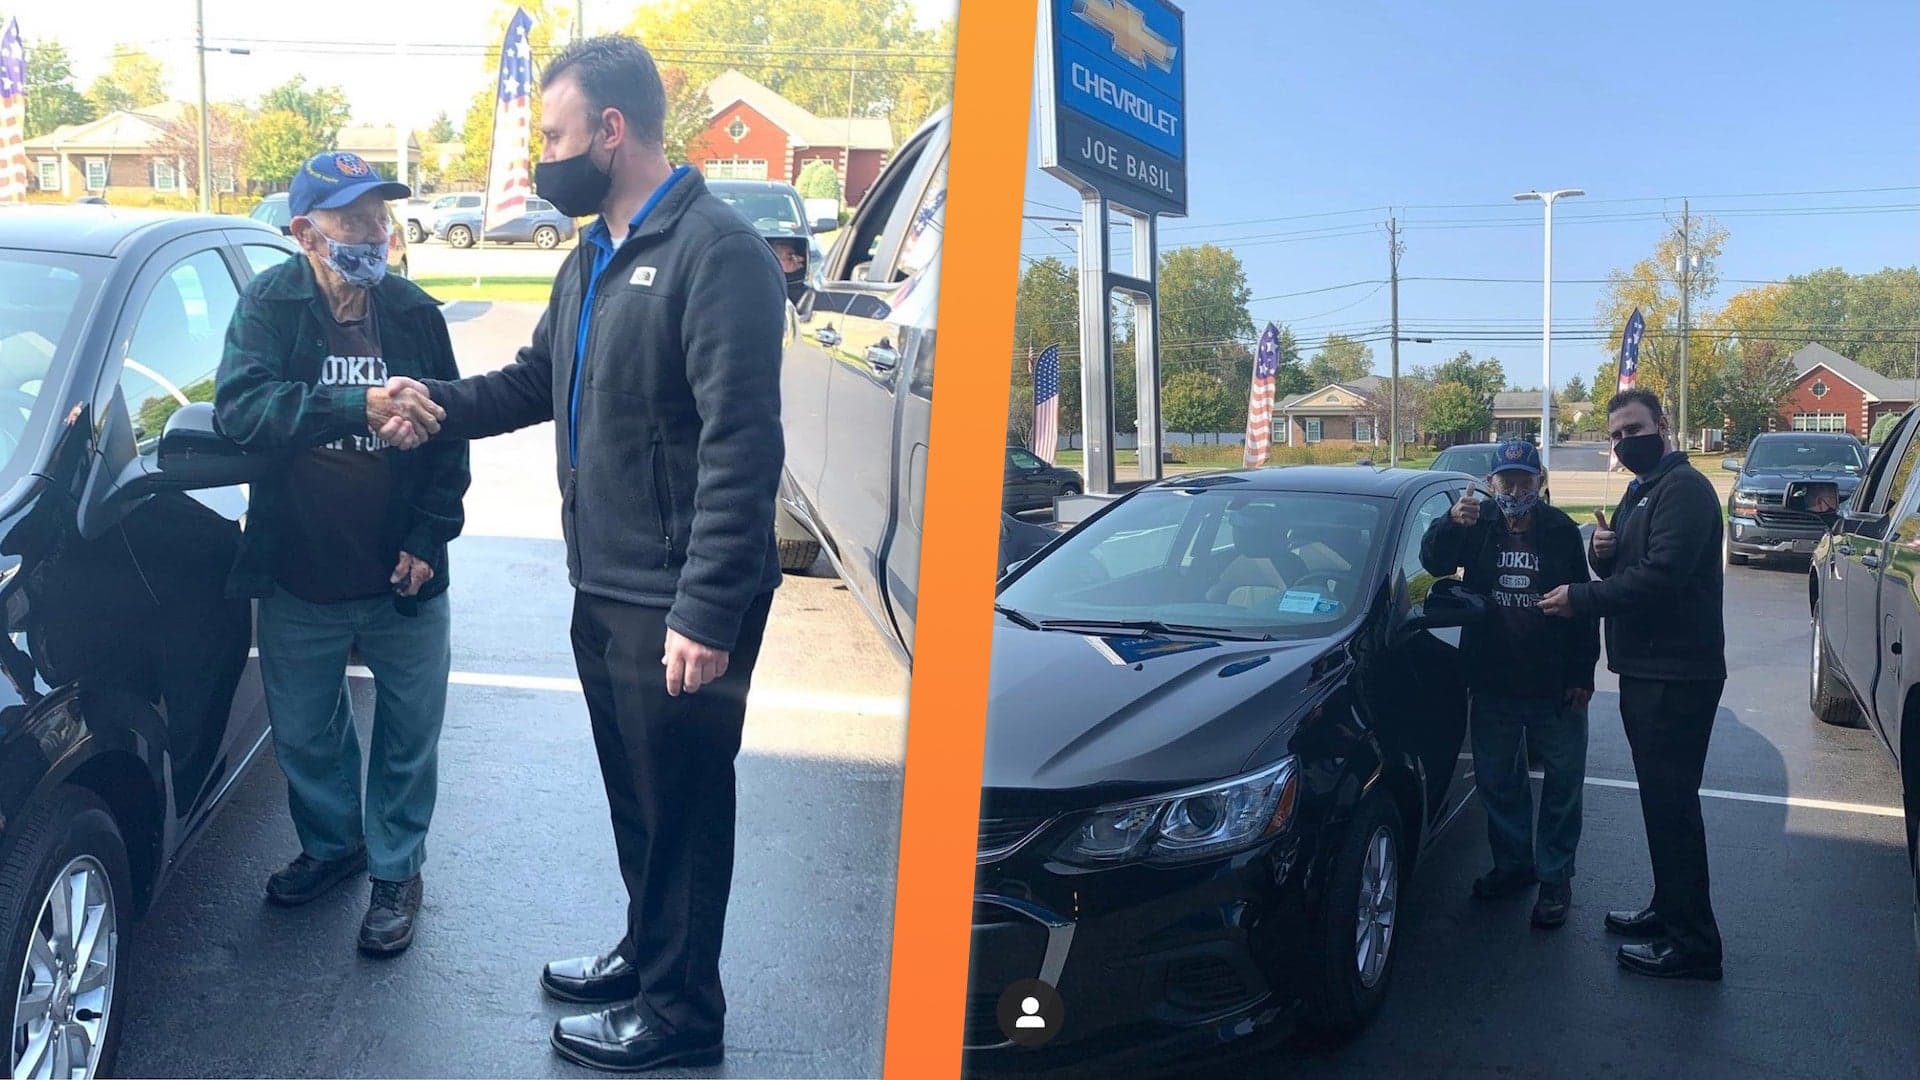 Chevy Dealer Gives Free Car to 104-Year-Old War Veteran Who Came in to Buy One